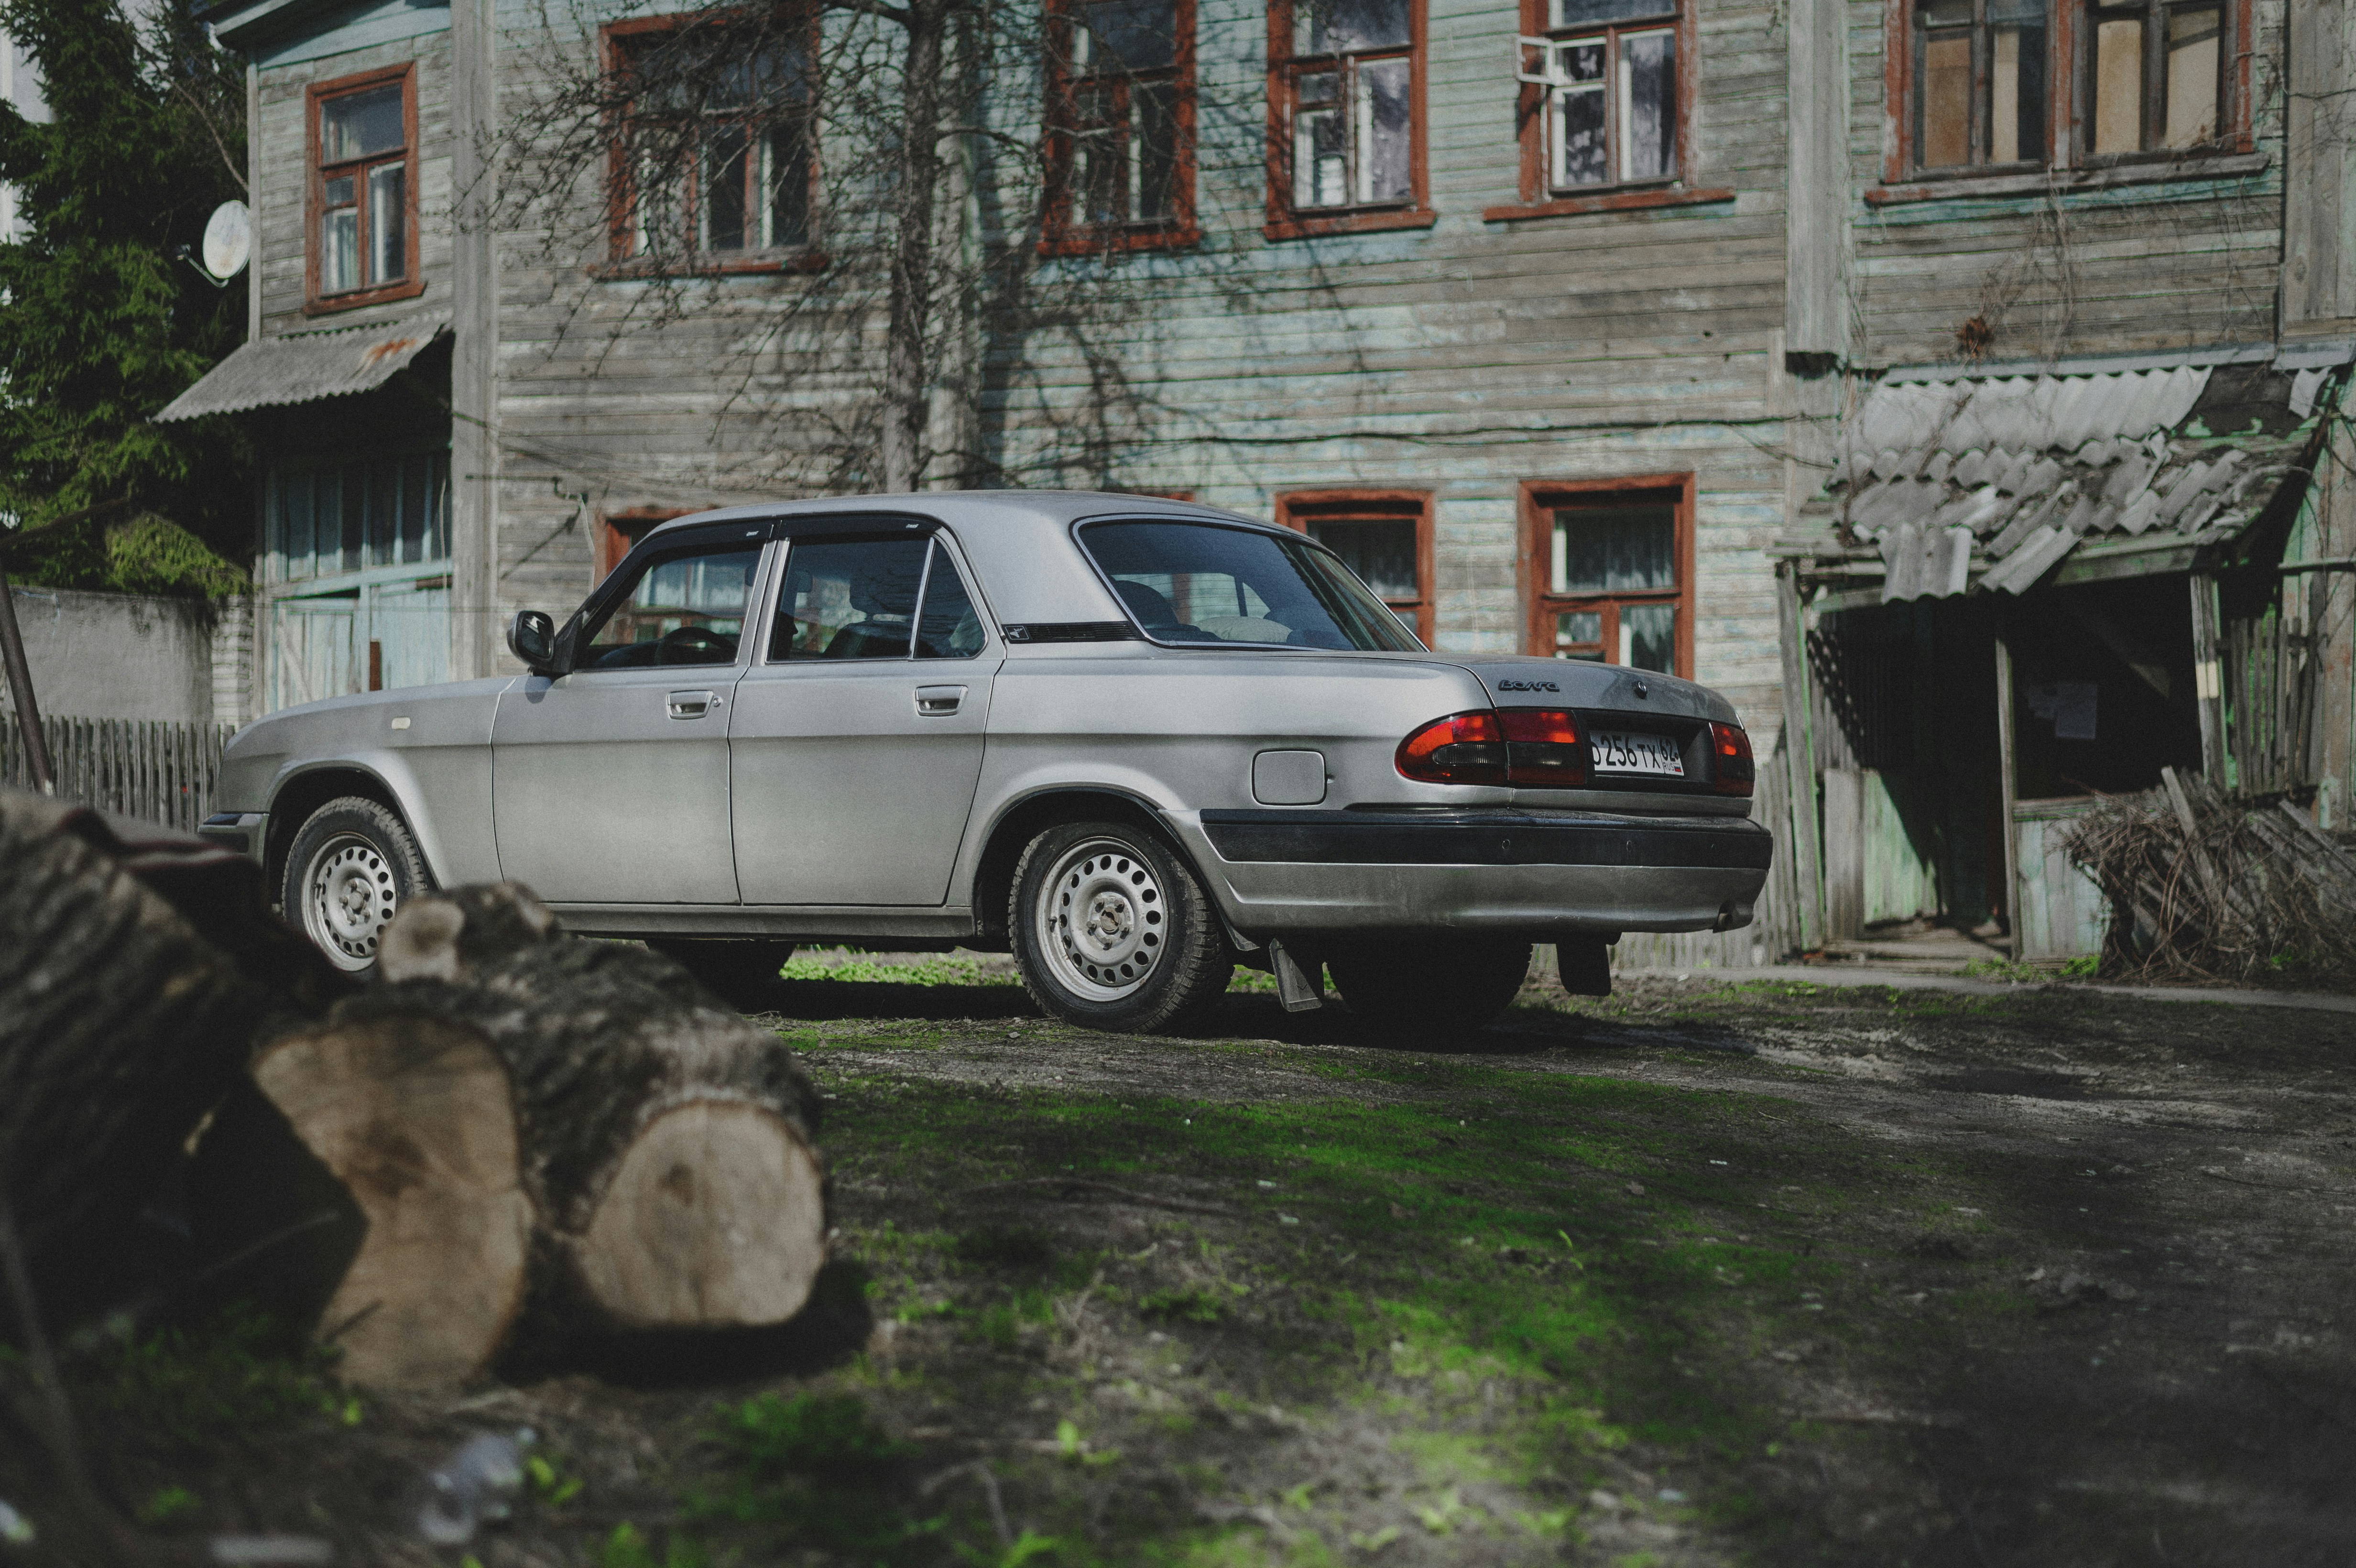 Car Volga, parked in the yard of an old wooden house.